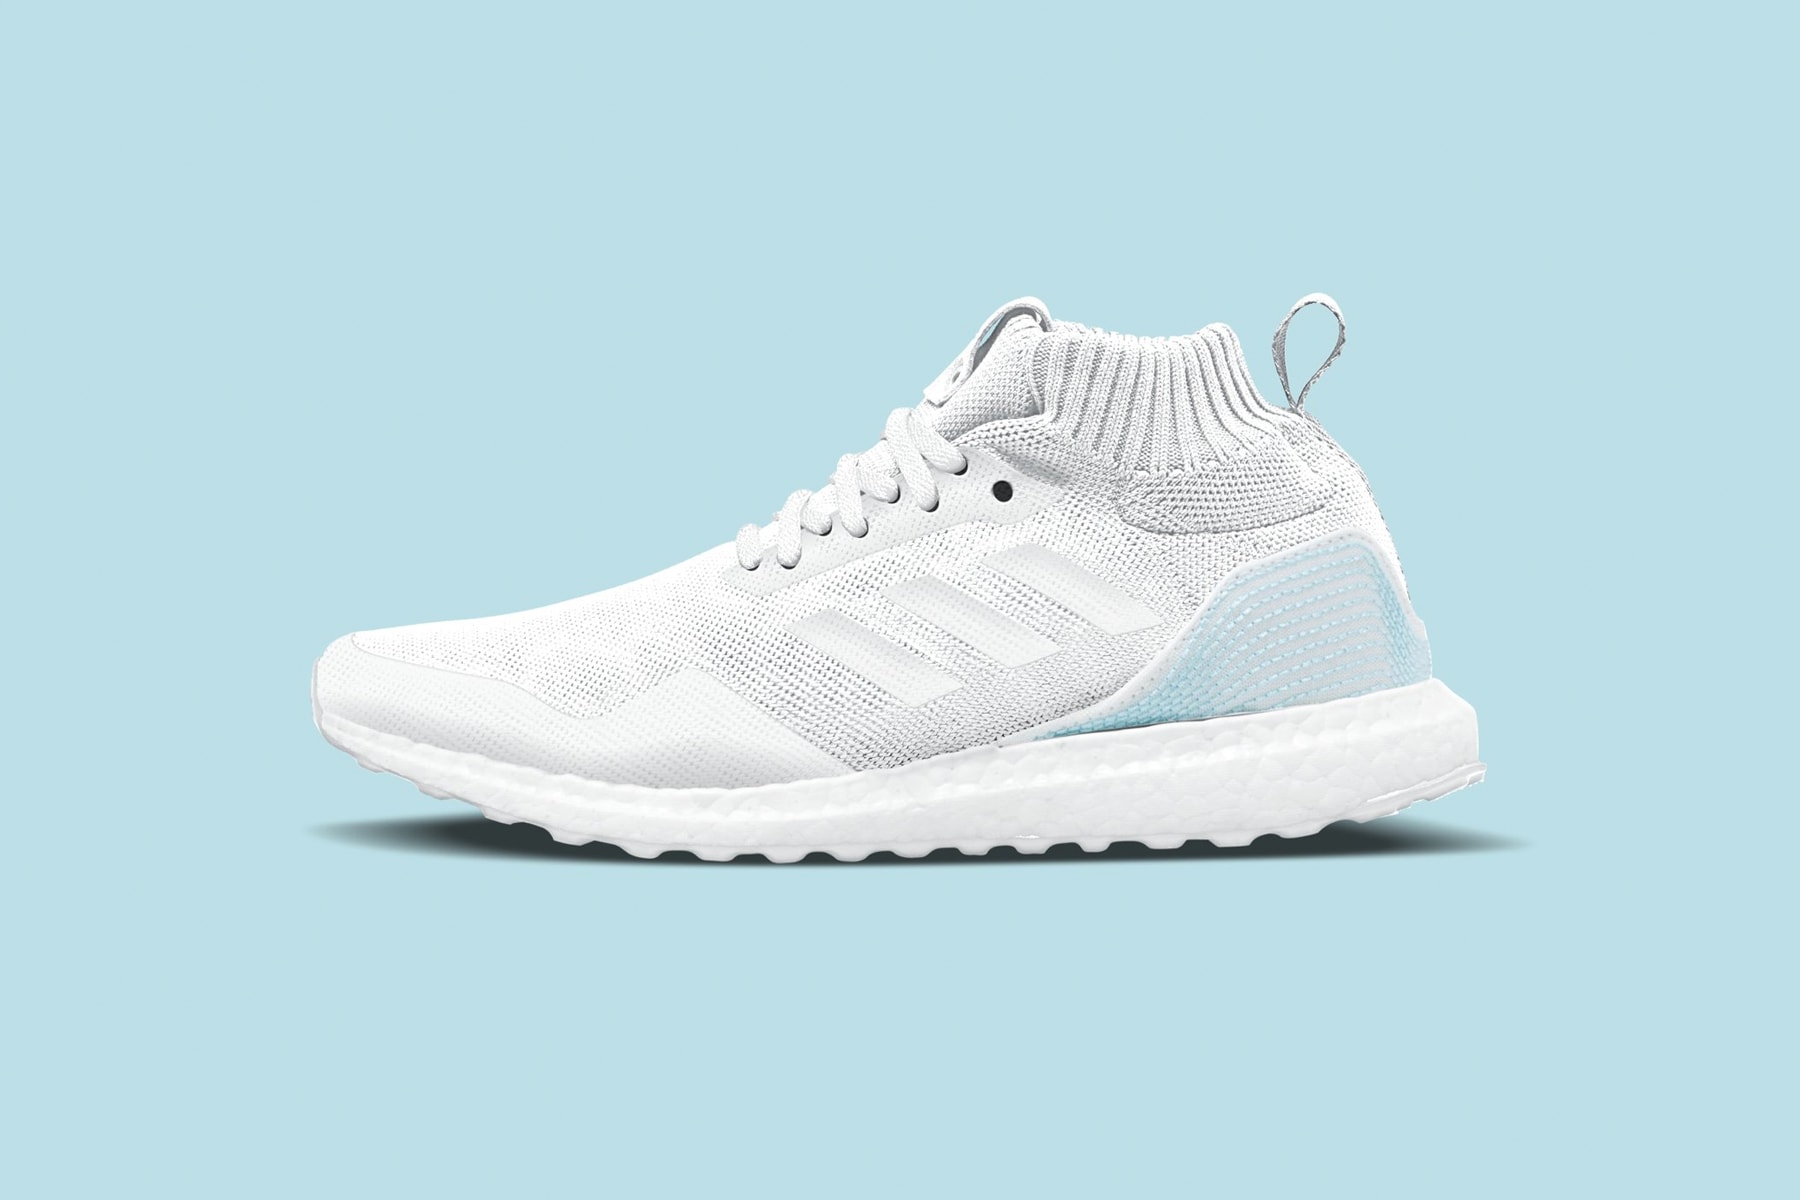 adidas x Parley for the Oceans 聯名 UltraBOOST Mid 曝光